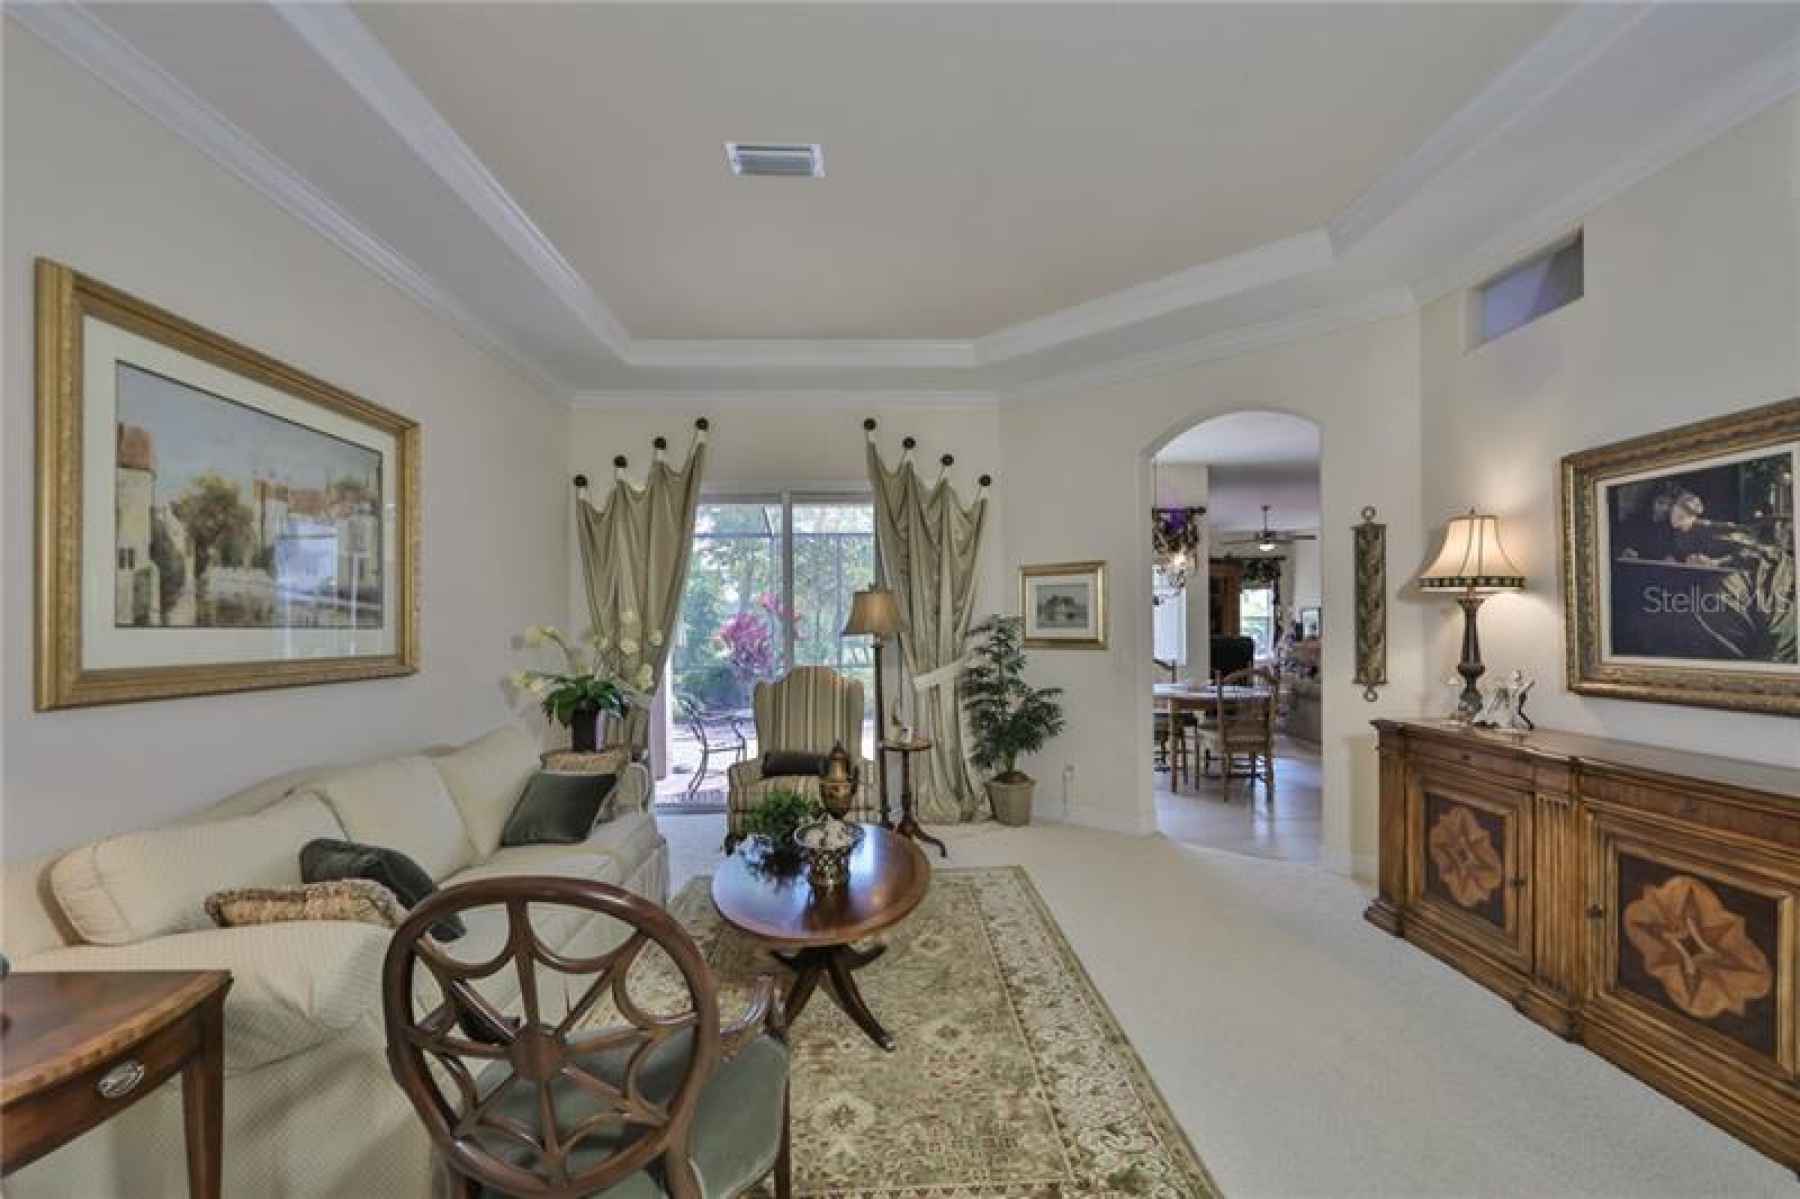 The tray ceiling, crown molding and subtle nuances of high end details, such as the rounded corners 